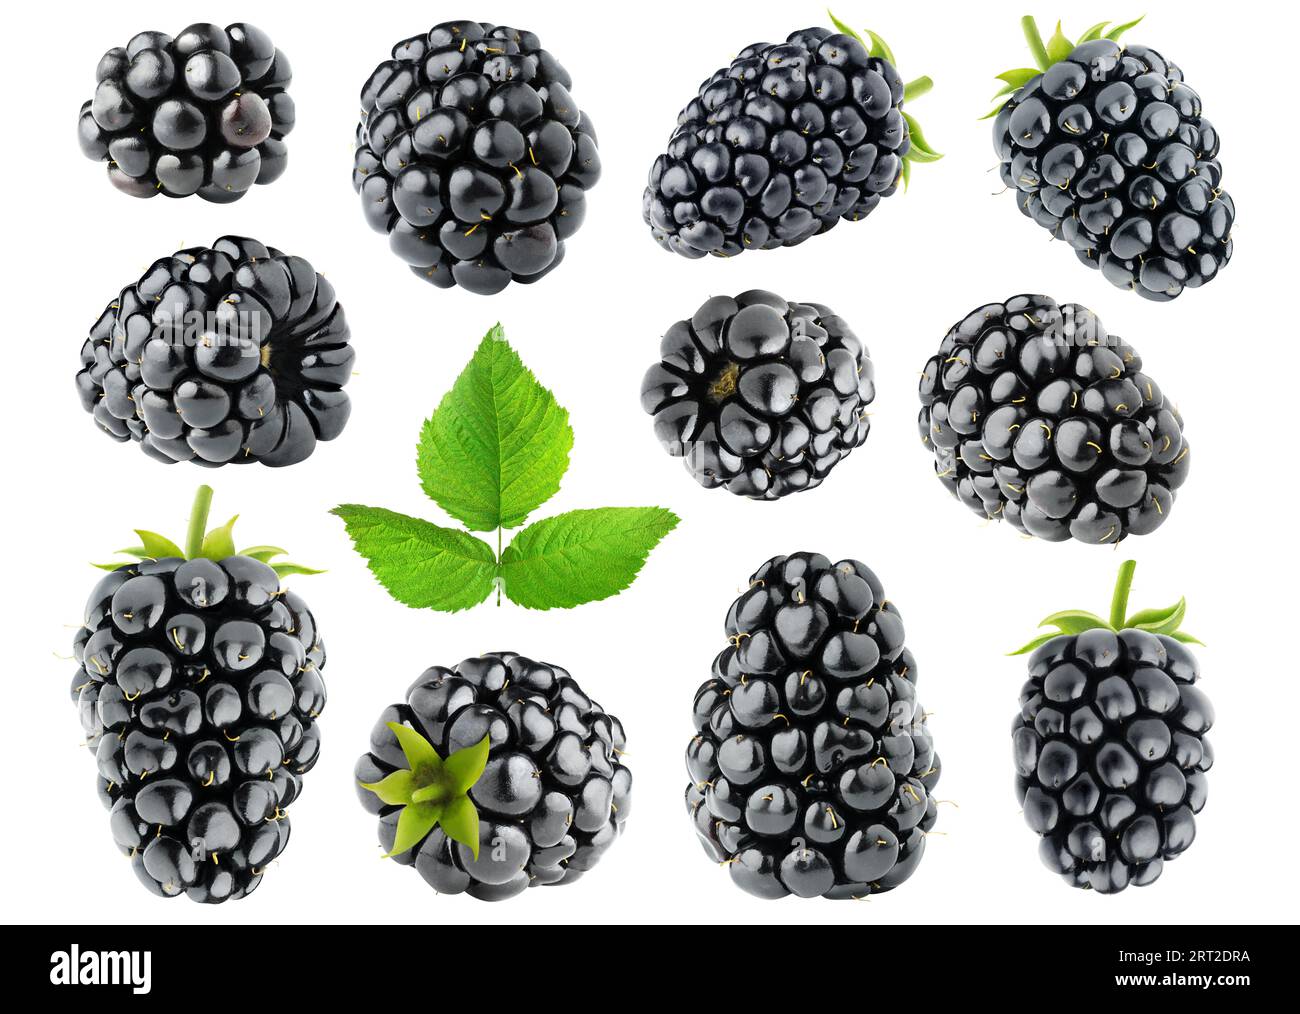 Collection of blackberry fruits with stem and leaf isolated on white background Stock Photo